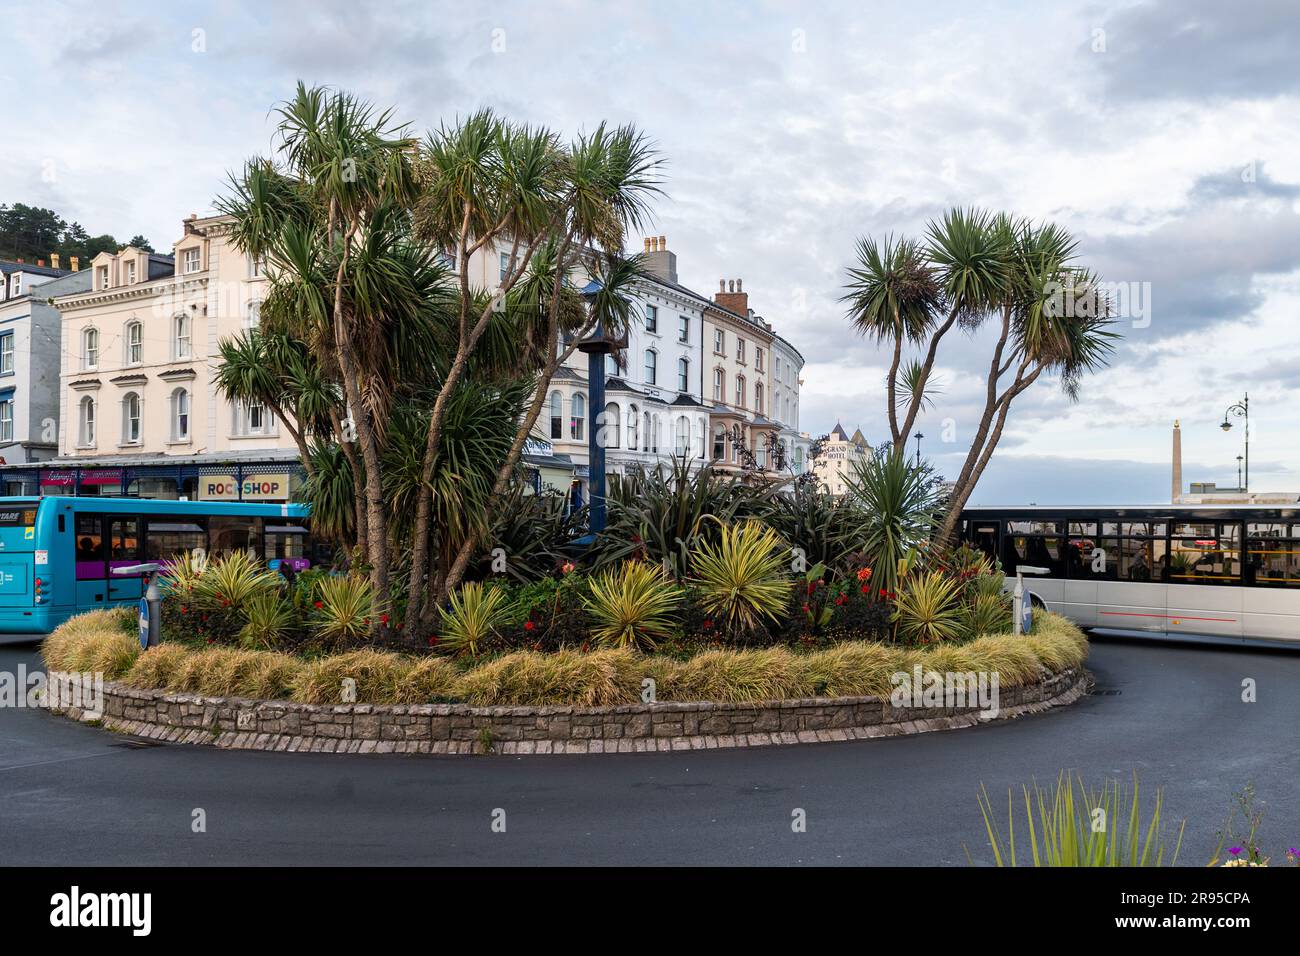 Buses go round the floral roundabout in the centre of the Victorian seaside resort of Llandudno, North Wales, UK. Stock Photo